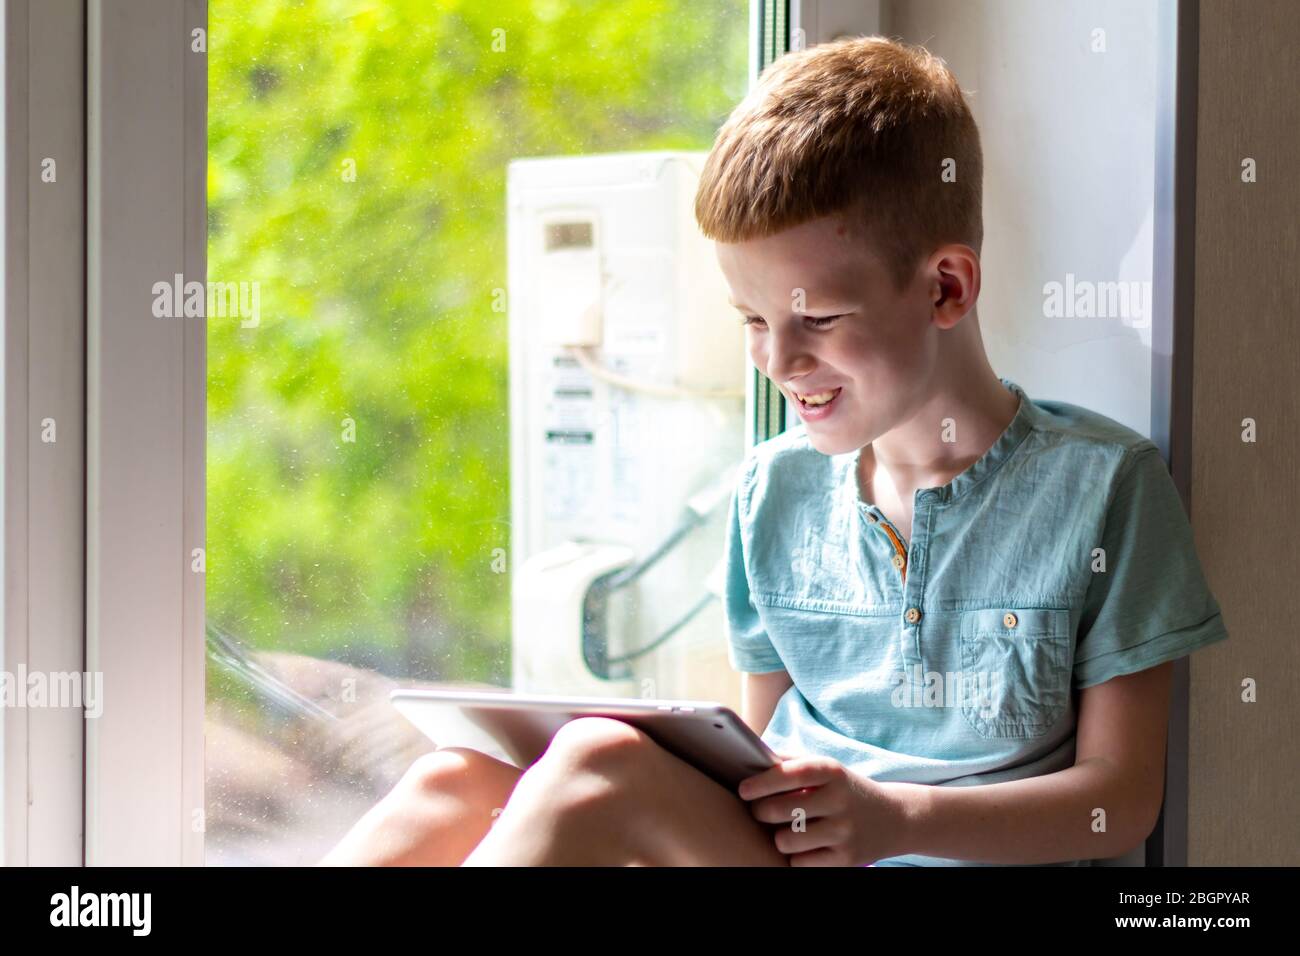 Young boy sitting on windowsill with tablet and play the games. Stay at home during quarantine. Stock Photo